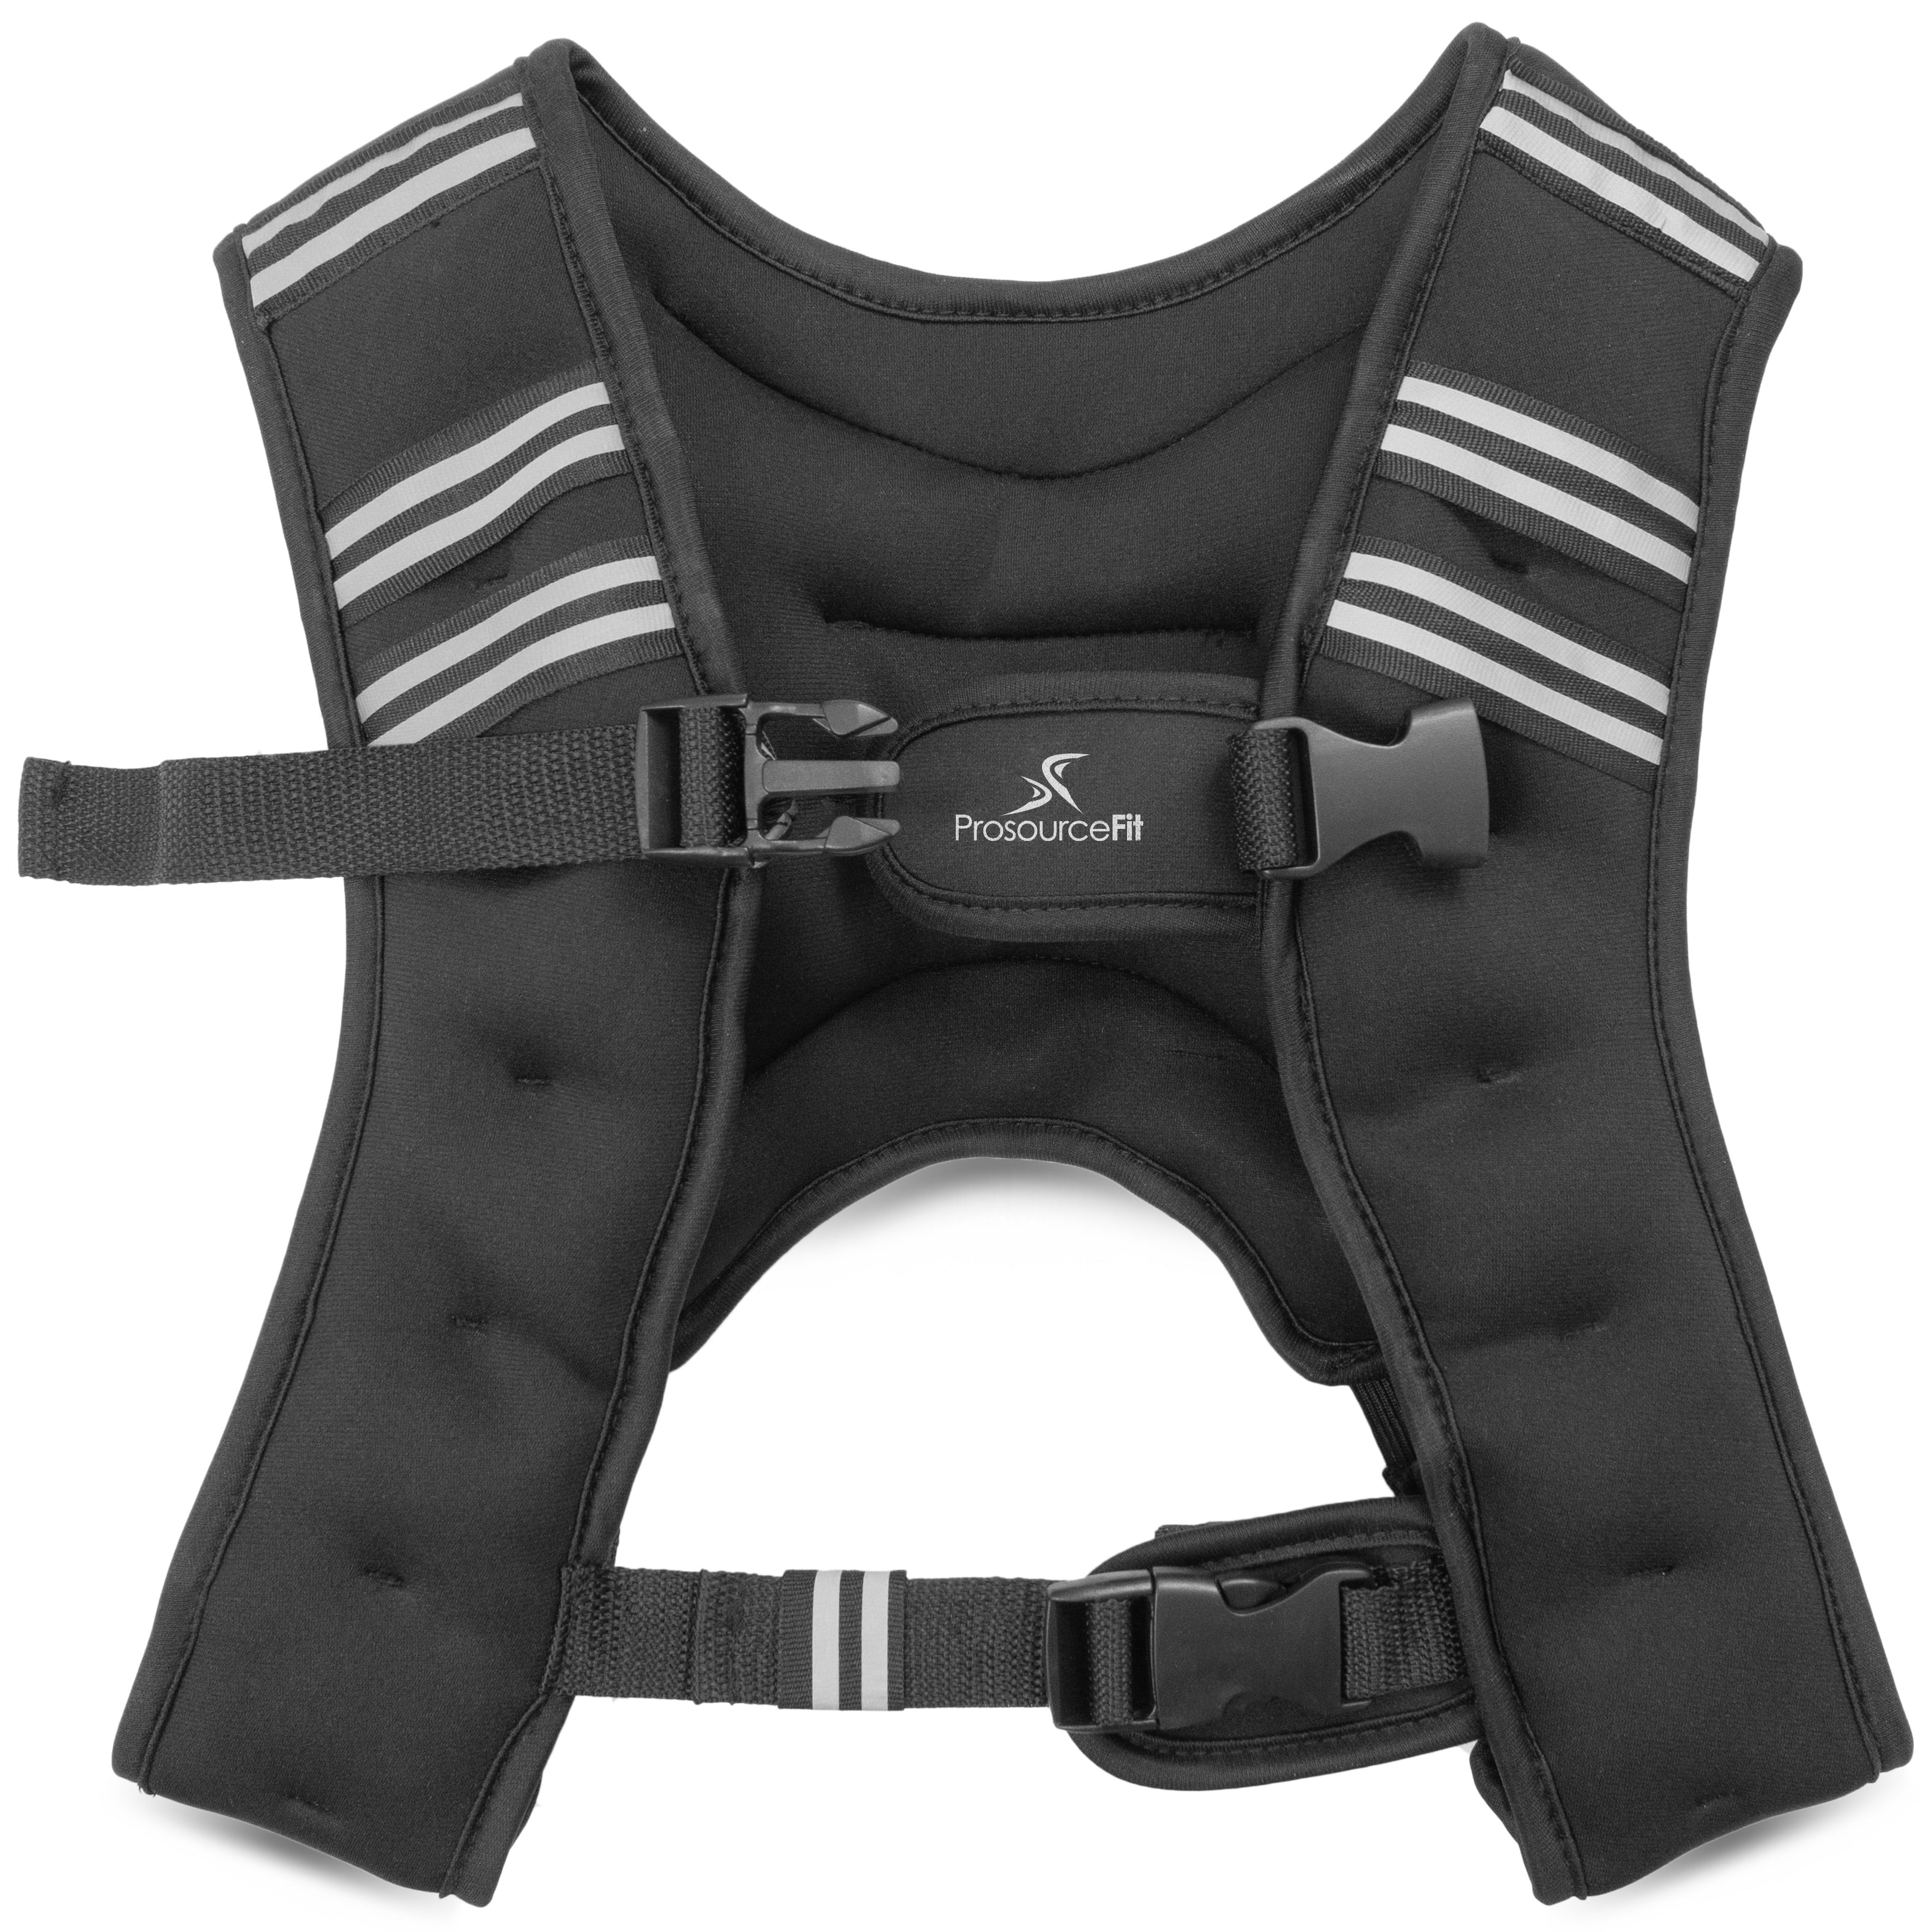 Abilitations Weighted 6 Pound Vest 39 X 19 to 24 Inches Black Large 1387587 for sale online